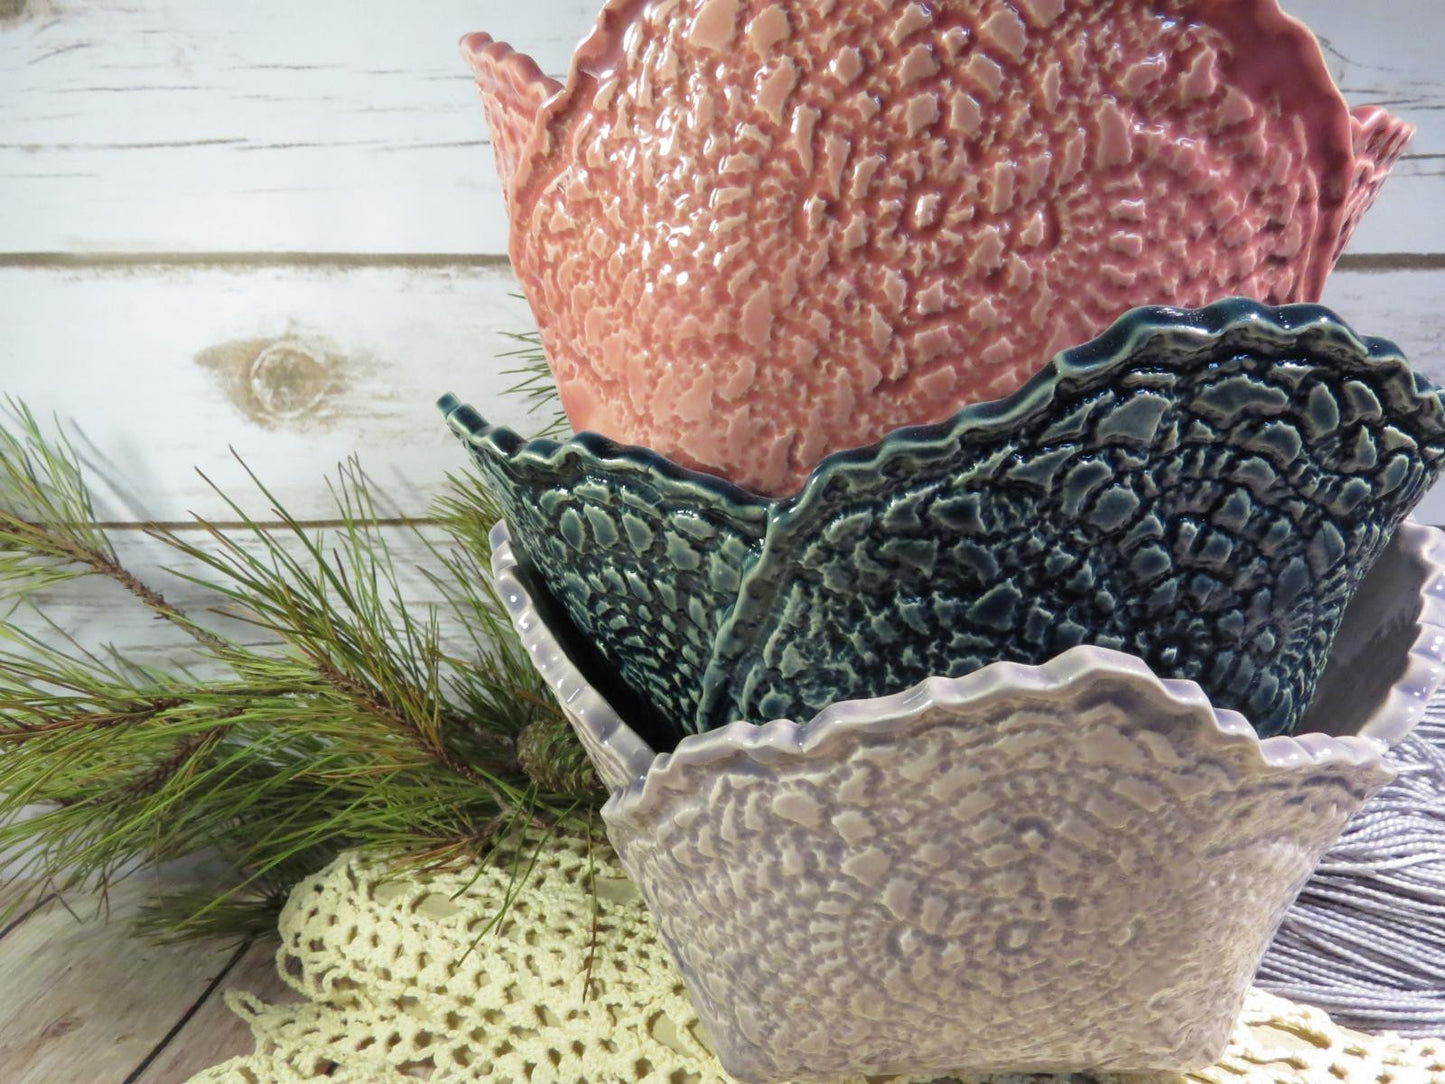 Crocheted Doily Bowl (Marie style)